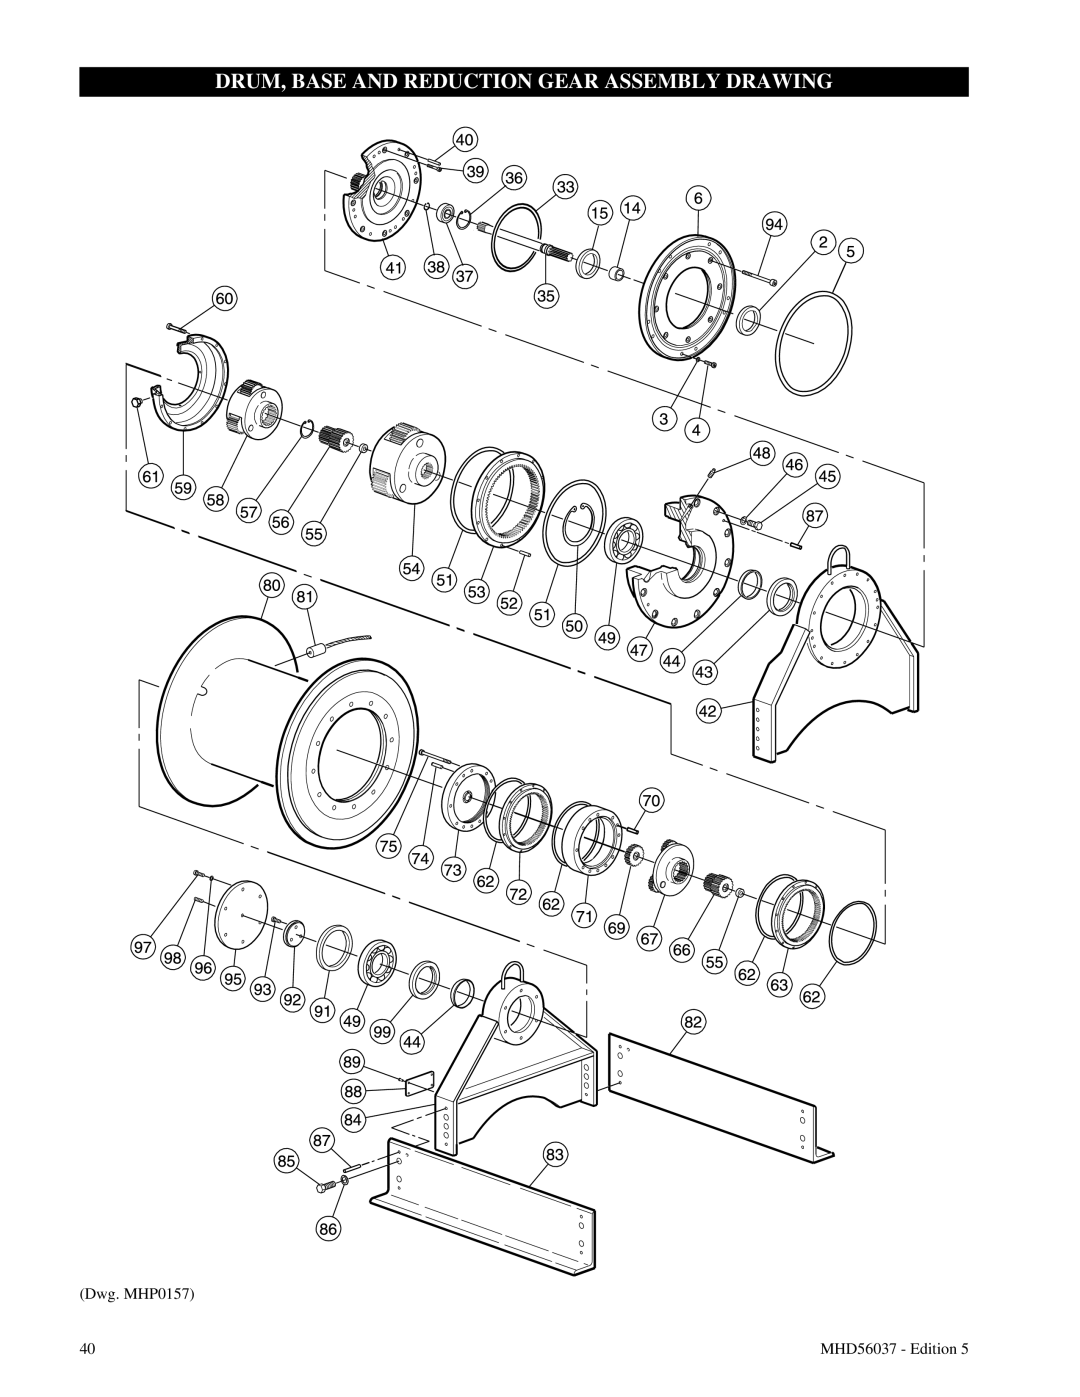 Ingersoll-Rand FA5T manual Drum, Base And Reduction Gear Assembly Drawing, Dwg. MHP0157, MHD56037 - Edition 